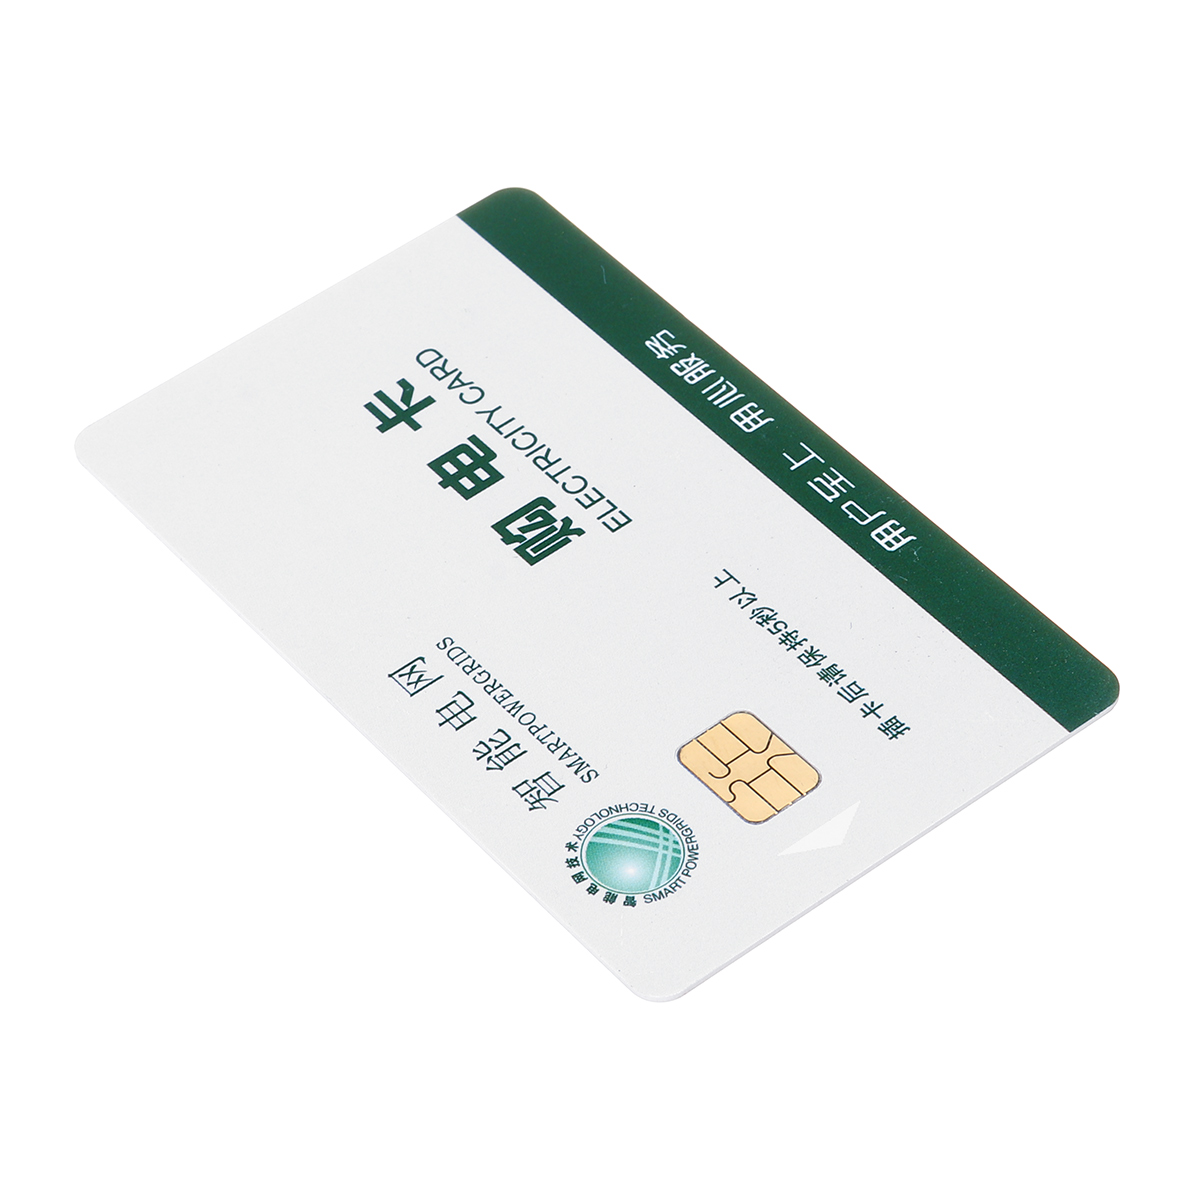 Card-Reader-IC-Card-For-Energy-Meter-1638300-7